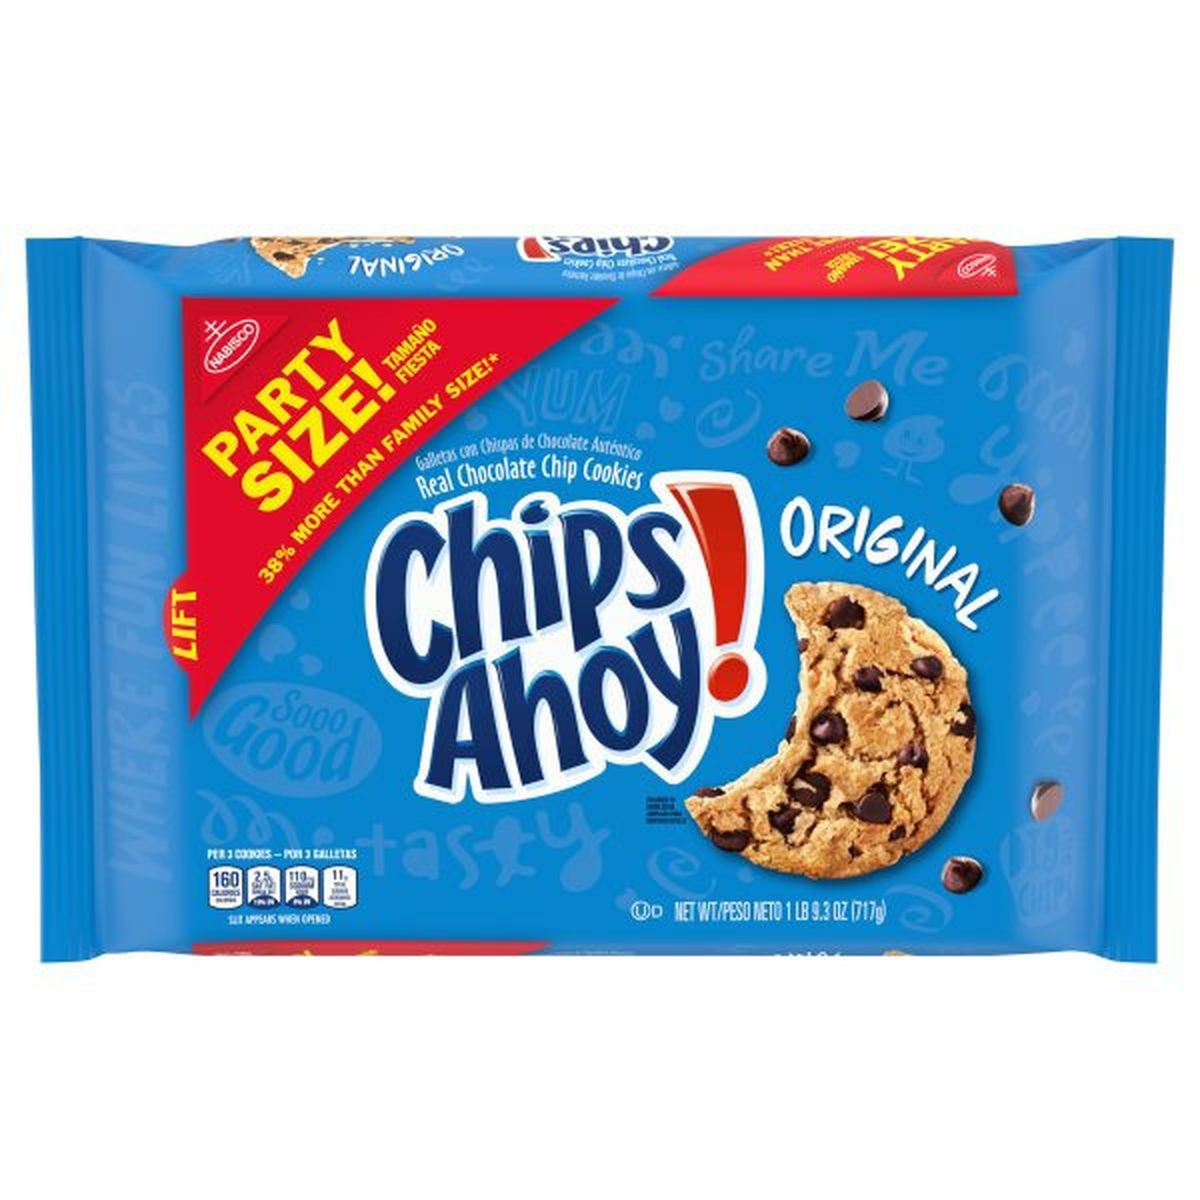 Calories in Chips Ahoy! Cookies, Original, Party Size